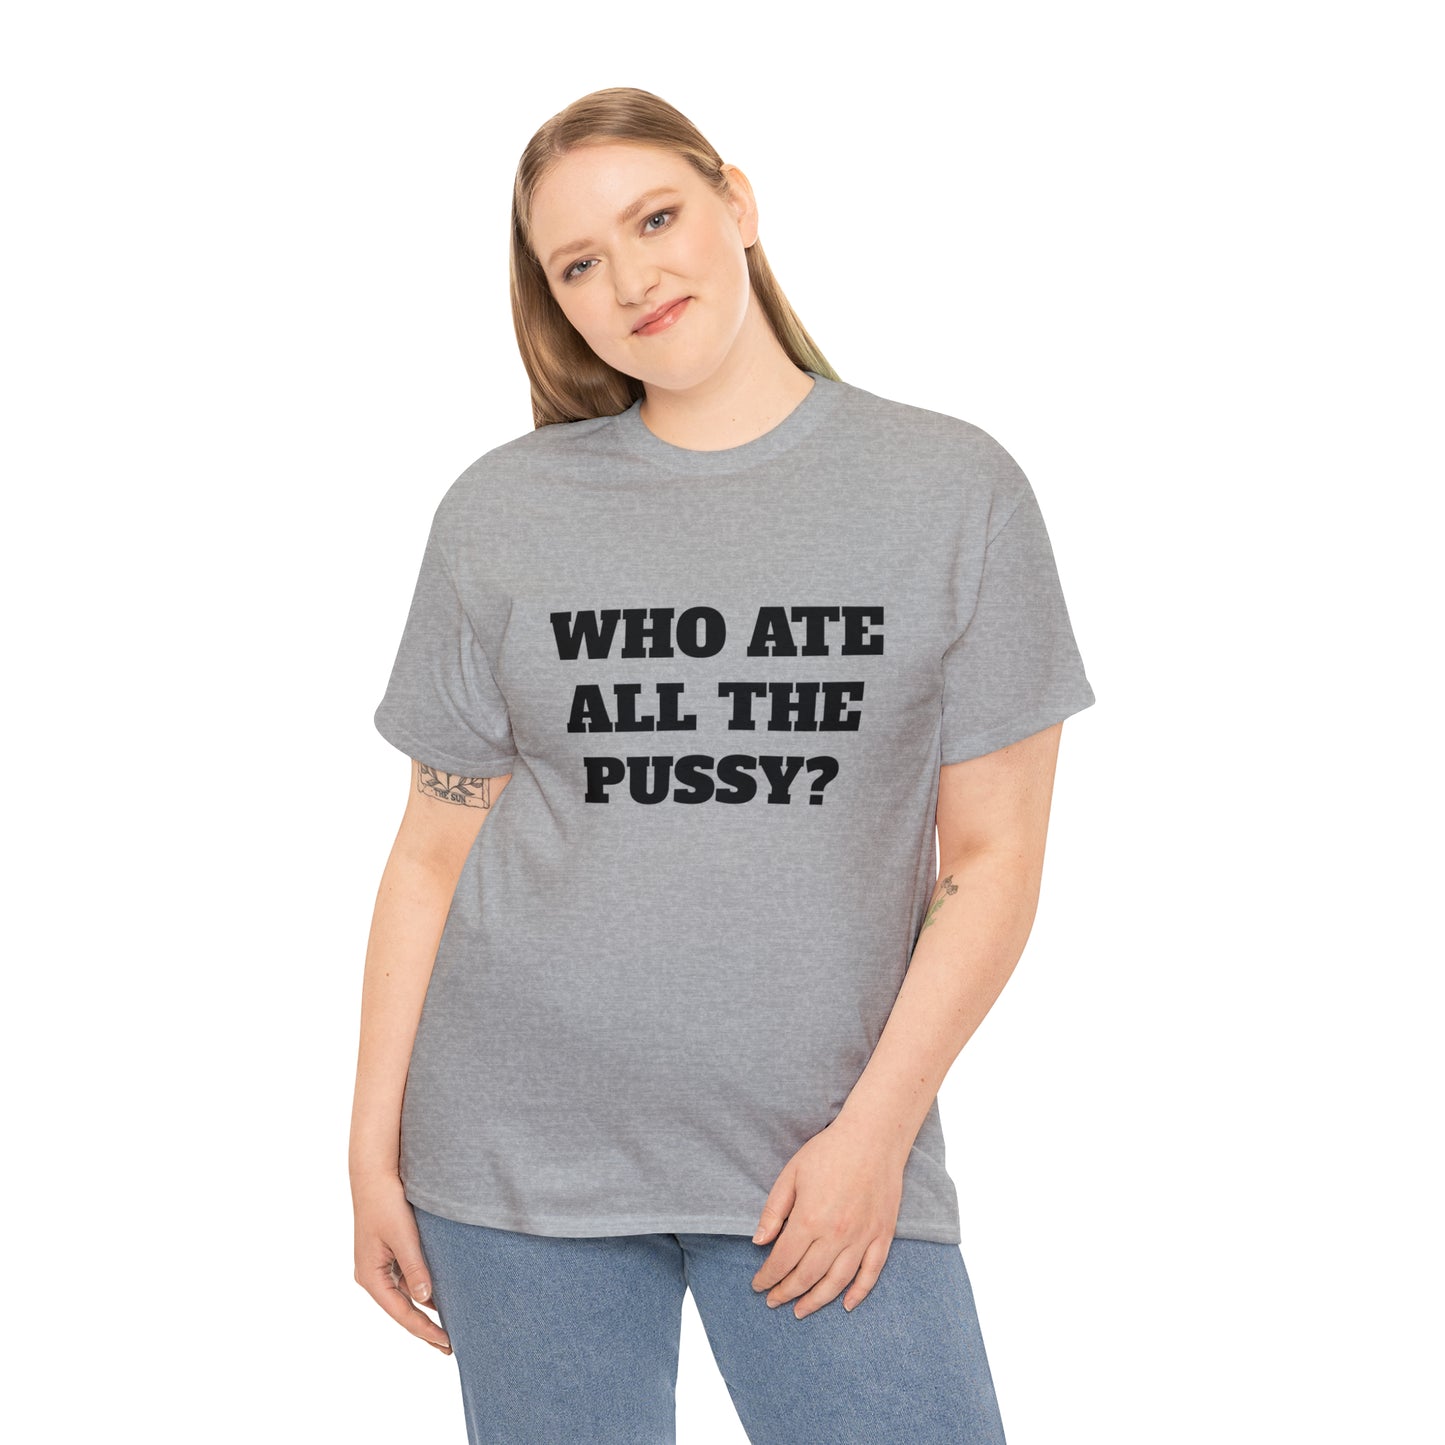 WHO ATE ALL THE PUSSY T-SHIRT